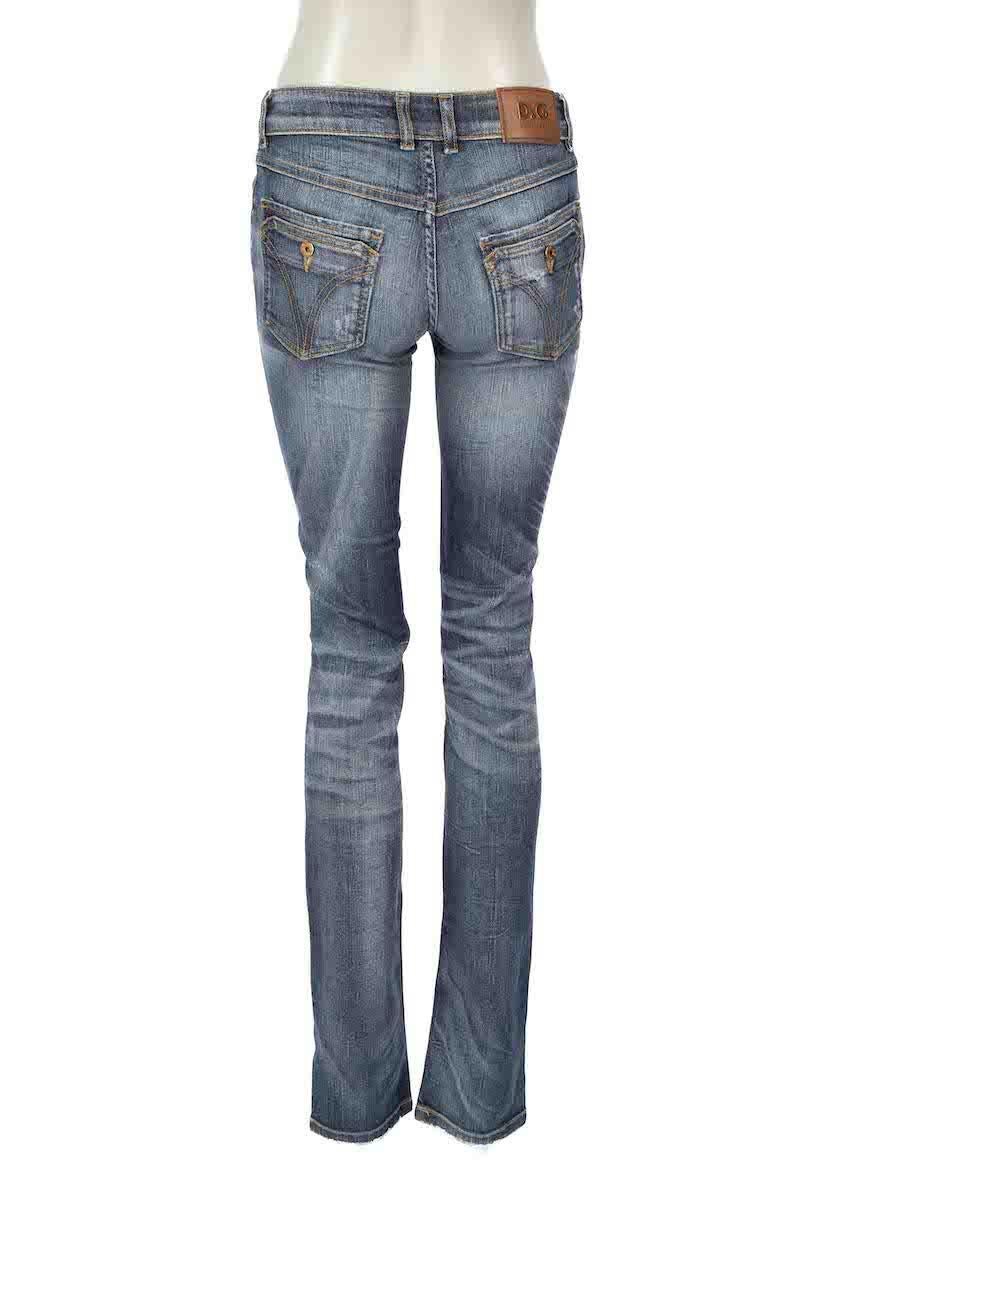 Dolce & Gabbana Blue Stone Wash Distressed Jeans Size XS In Excellent Condition For Sale In London, GB